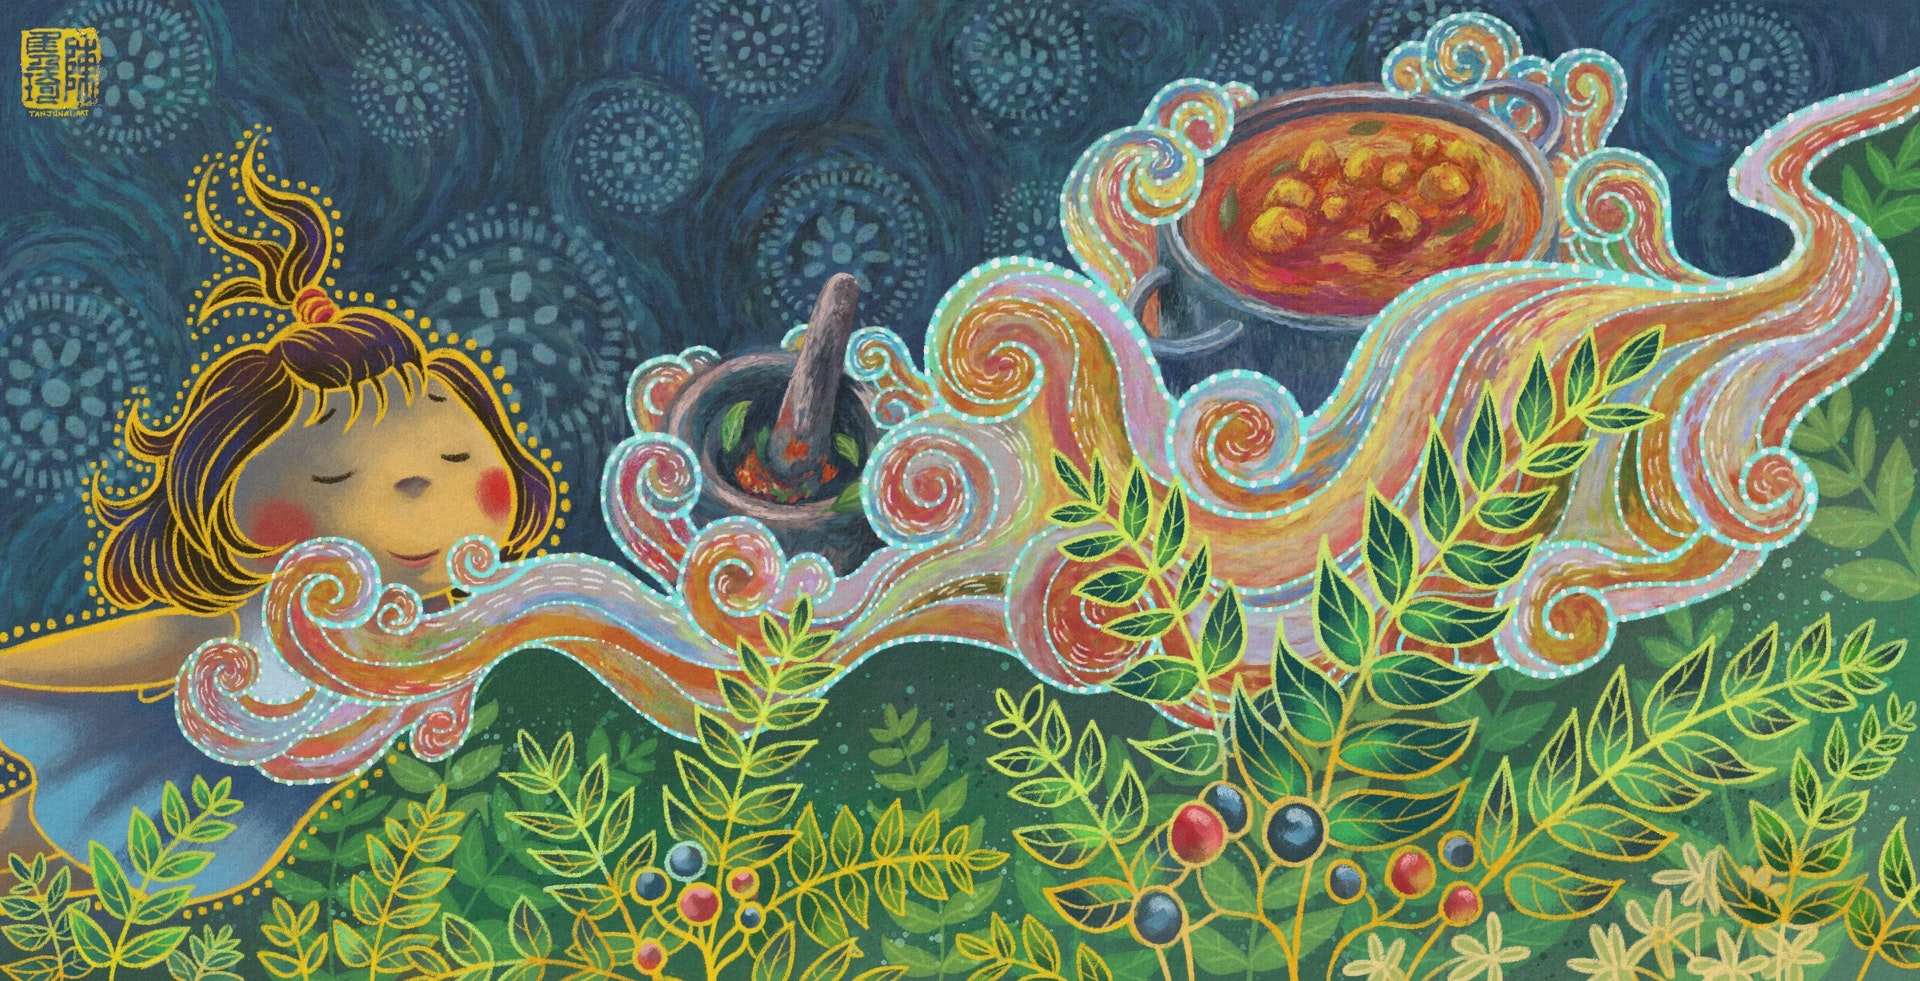 Digital painting with chalk texture and batik-inspired style and motifs, of a dreamy, whimsical scene where a young girl with short curly hair, some tied in a tuft above her head, in a pale blue dress with a white sailor color, is floating and following a scent cloud that stretches across the page. Below her curry leaves, fruiting and flowering, are swaying, while a pot of curry and curry paste in a mortar and pestle float above the scent cloud, against a dark blue background of circular batik motifs.